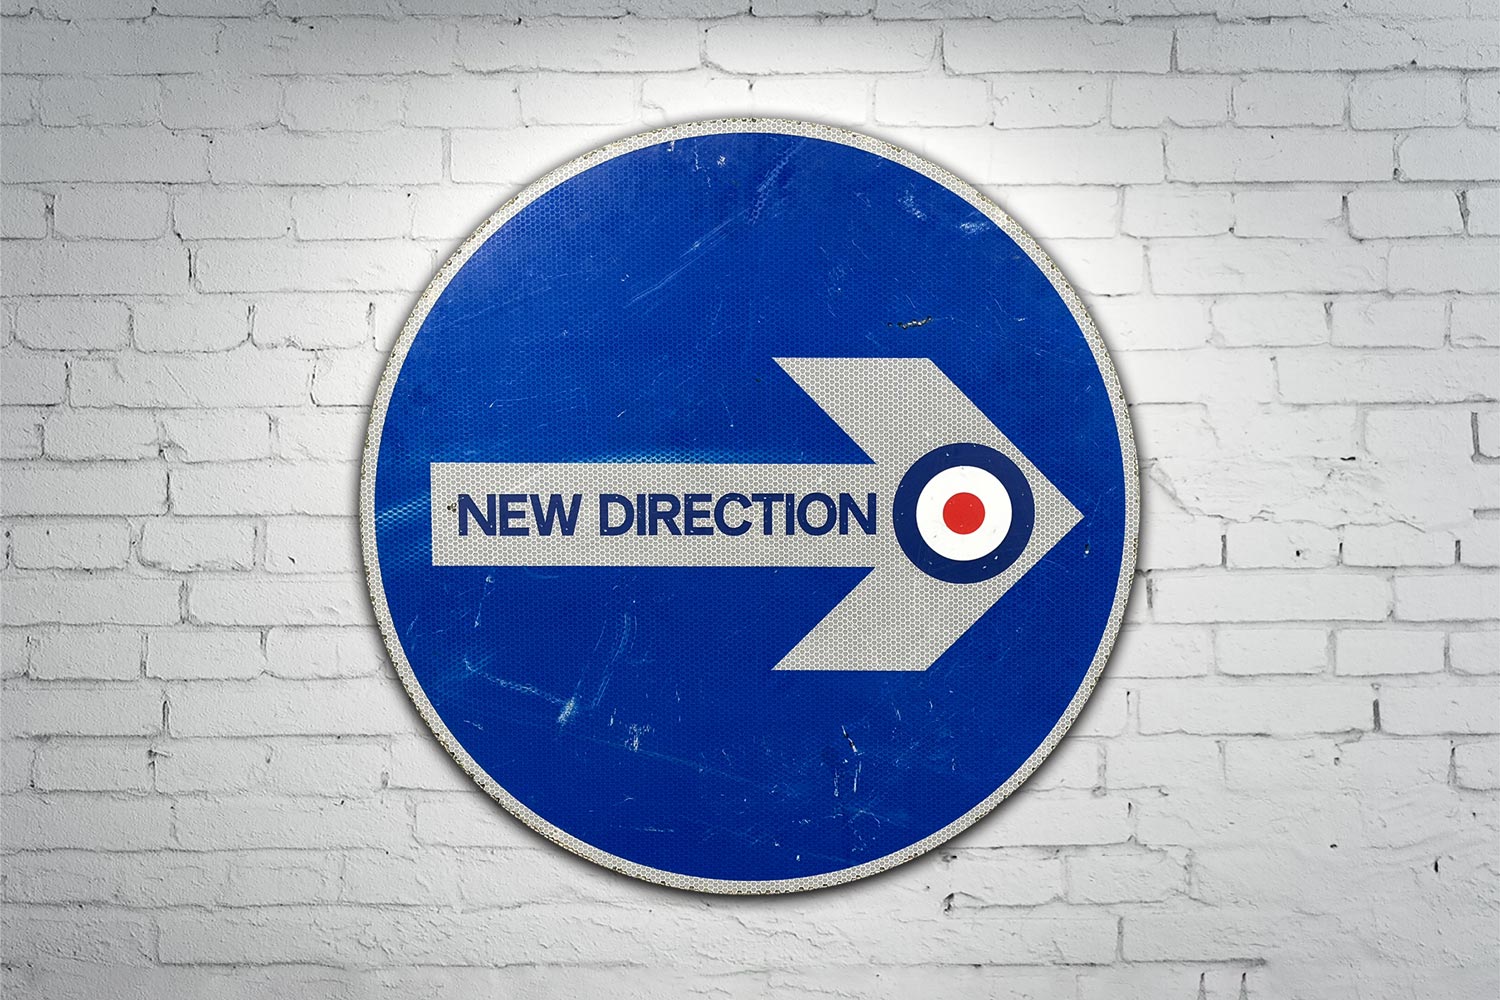 NEW DIRECTION – ROCK’N’ROAD SIGNS